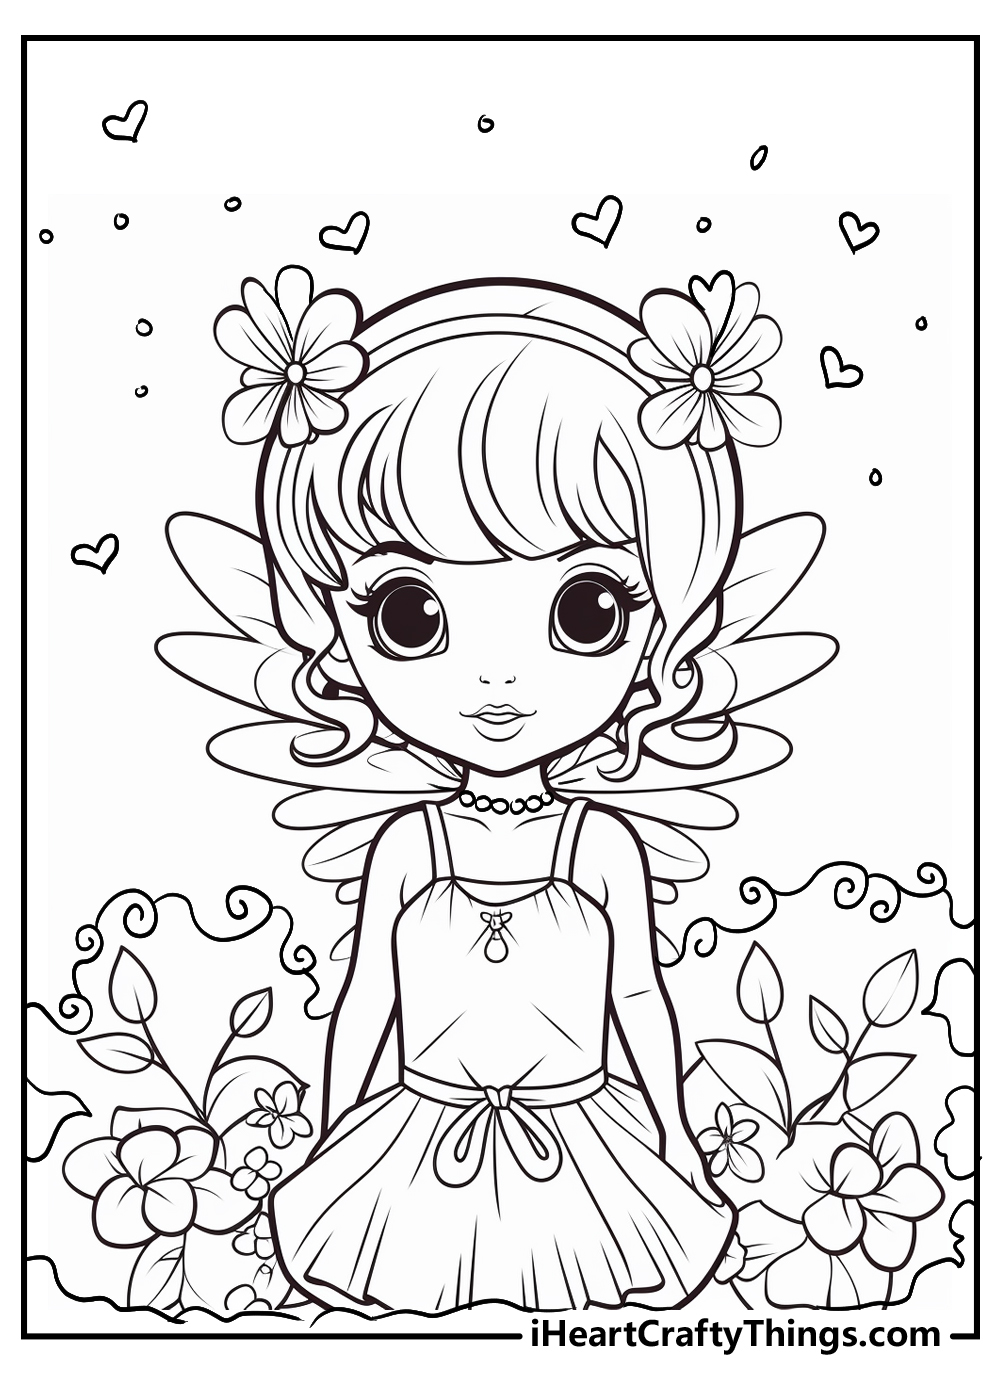 Printable fairy coloring pages updated